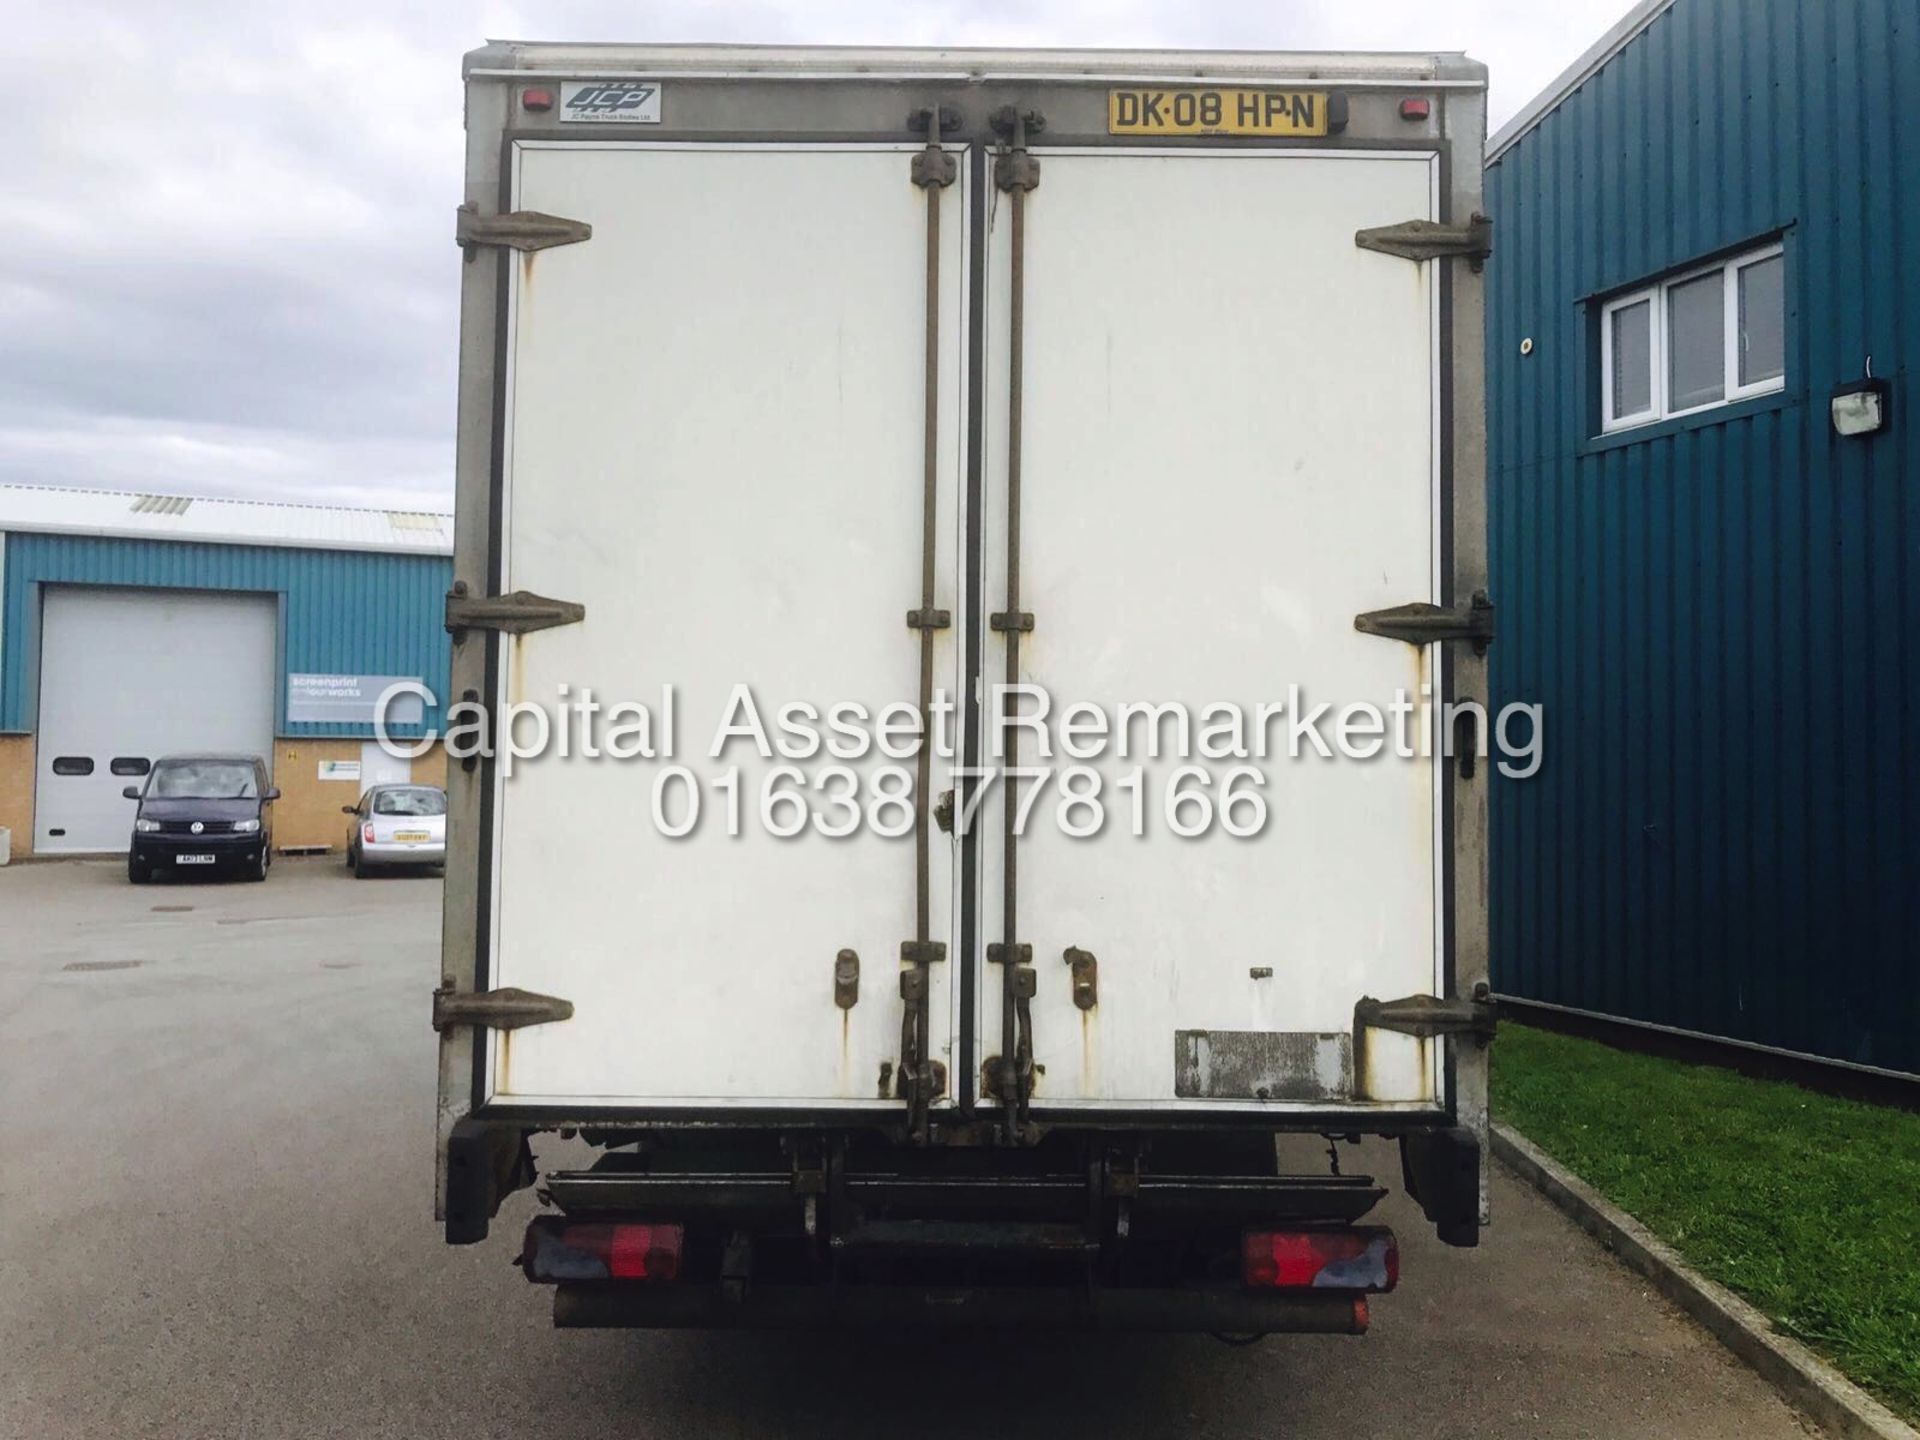 MAN TGL7 "150" 20 FOOT CURTAIN SIDE TRUCK (08 REG) PLATED UNTIL END OF FEB 2018 -TUCK AWAY TAIL LIFT - Image 6 of 14